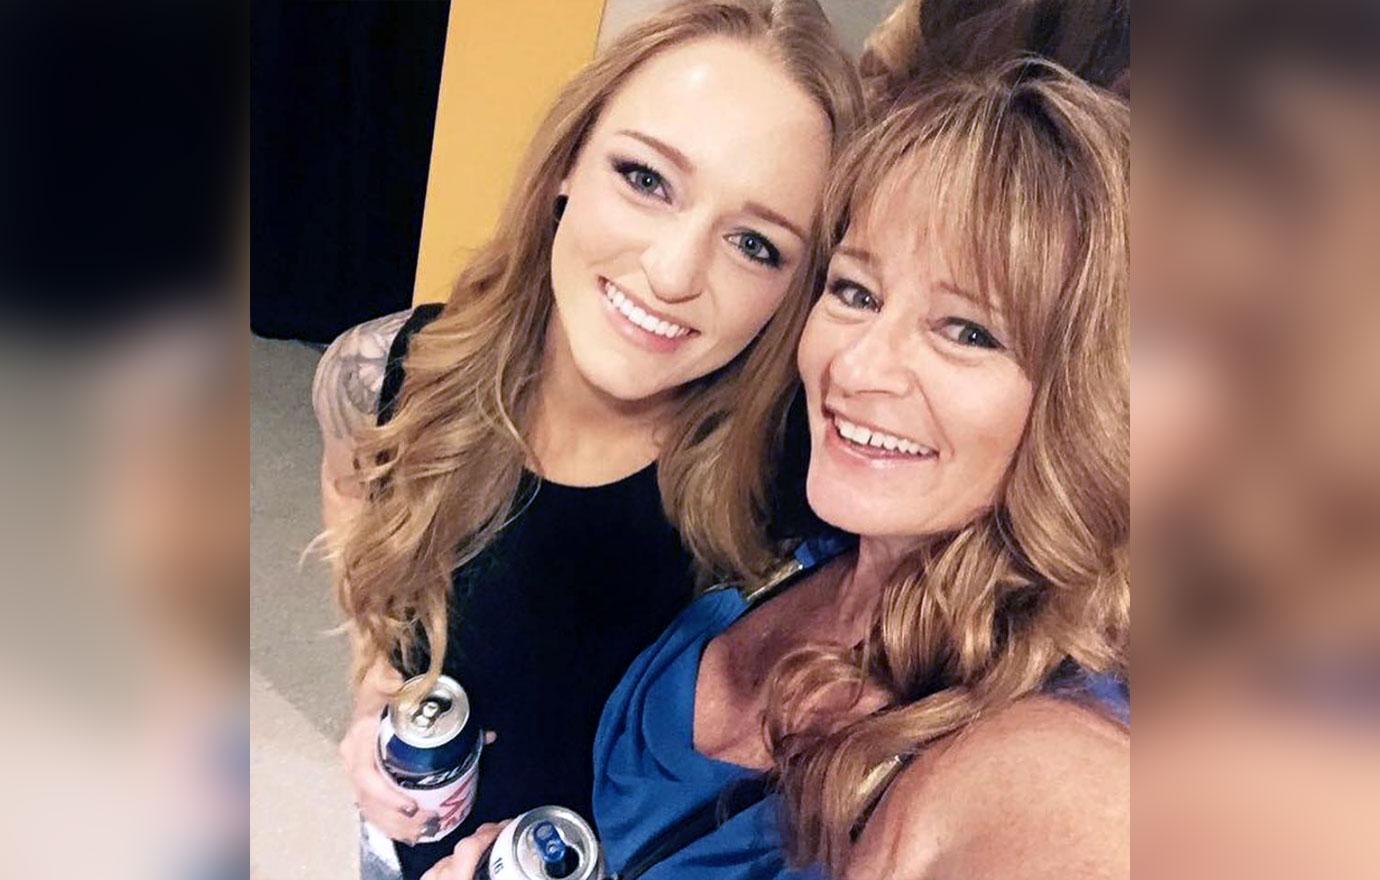 20-Year-Old Teen Mom Maci Bookout Caught Drinking!